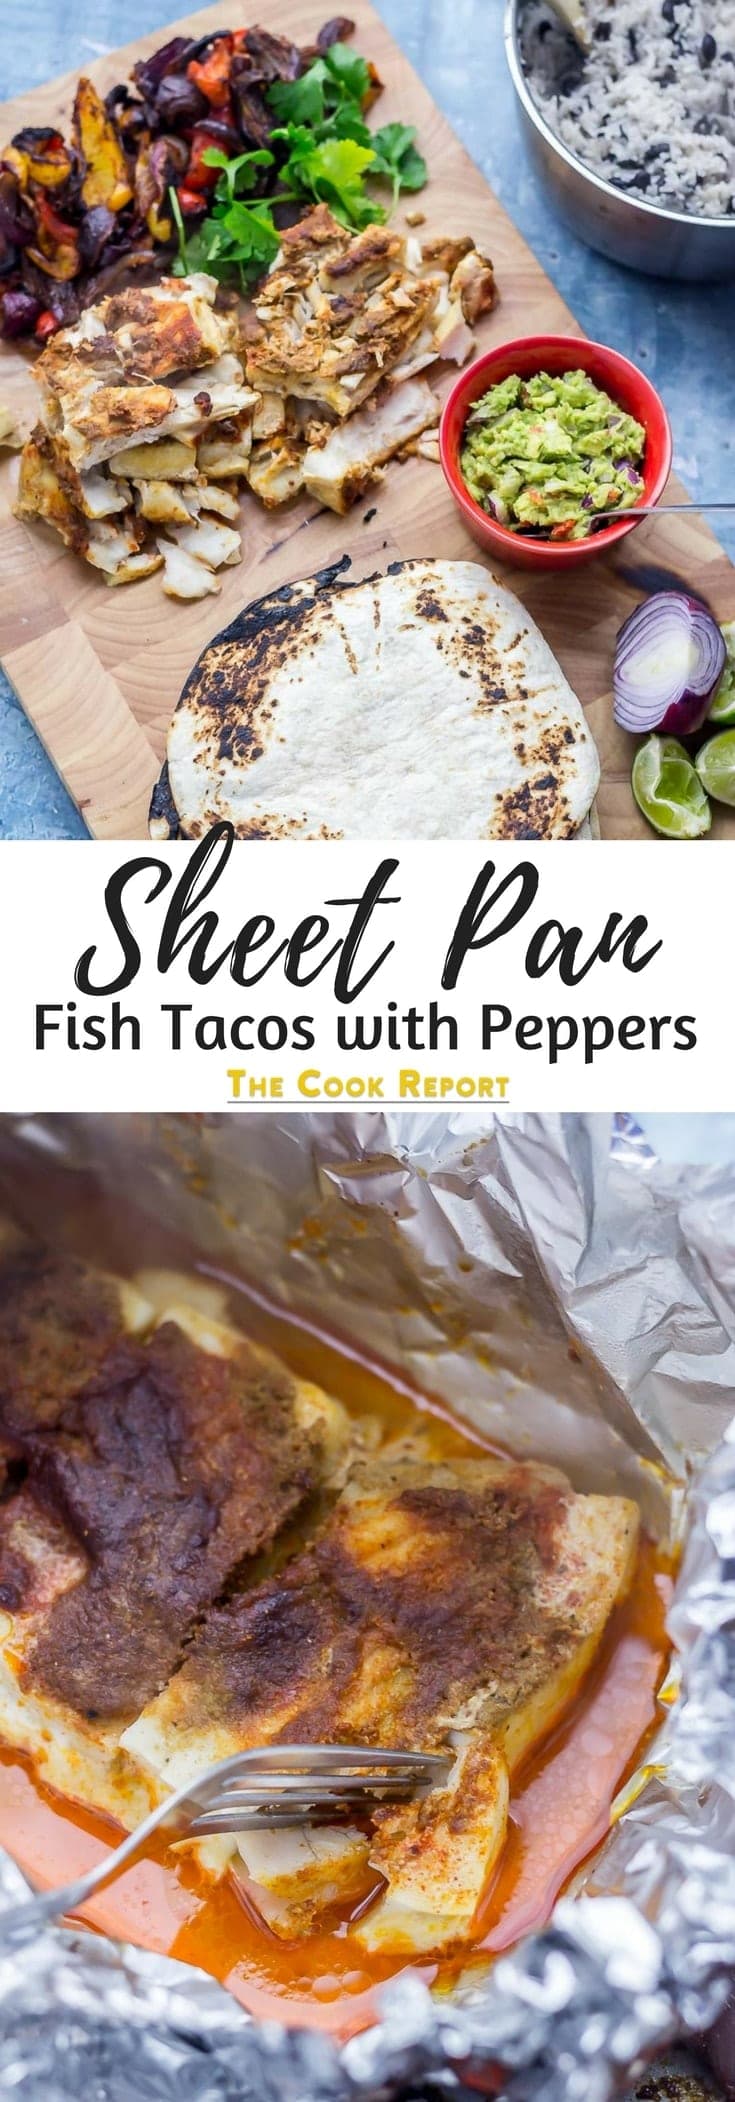 Fish tacos are a fun and tasty dinner. Now they're even easier because everything can be made on one sheet pan! Have flavour packed fish tacos on the table in half an hour. #fishtacos #mexicanrecipe #thecookreport #fishrecipe #tacorecipe